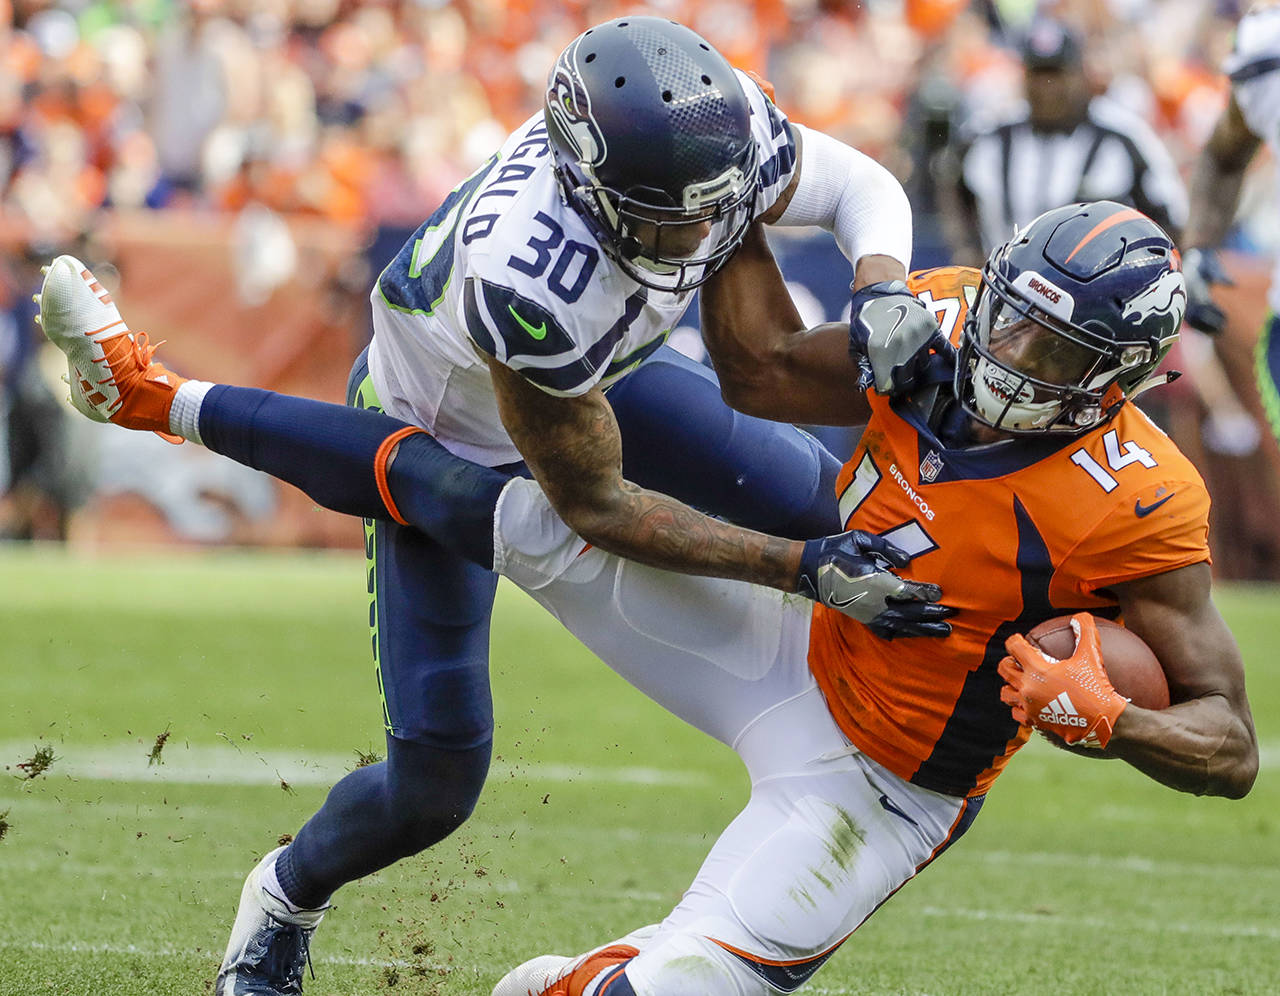 Denver Broncos wide receiver Courtland Sutton (14) is tackled by Seattle Seahawks defensive back Bradley McDougald (30) during the second half of an NFL football game on Sept. 9 in Denver. (AP Photo/Jack Dempsey, file)